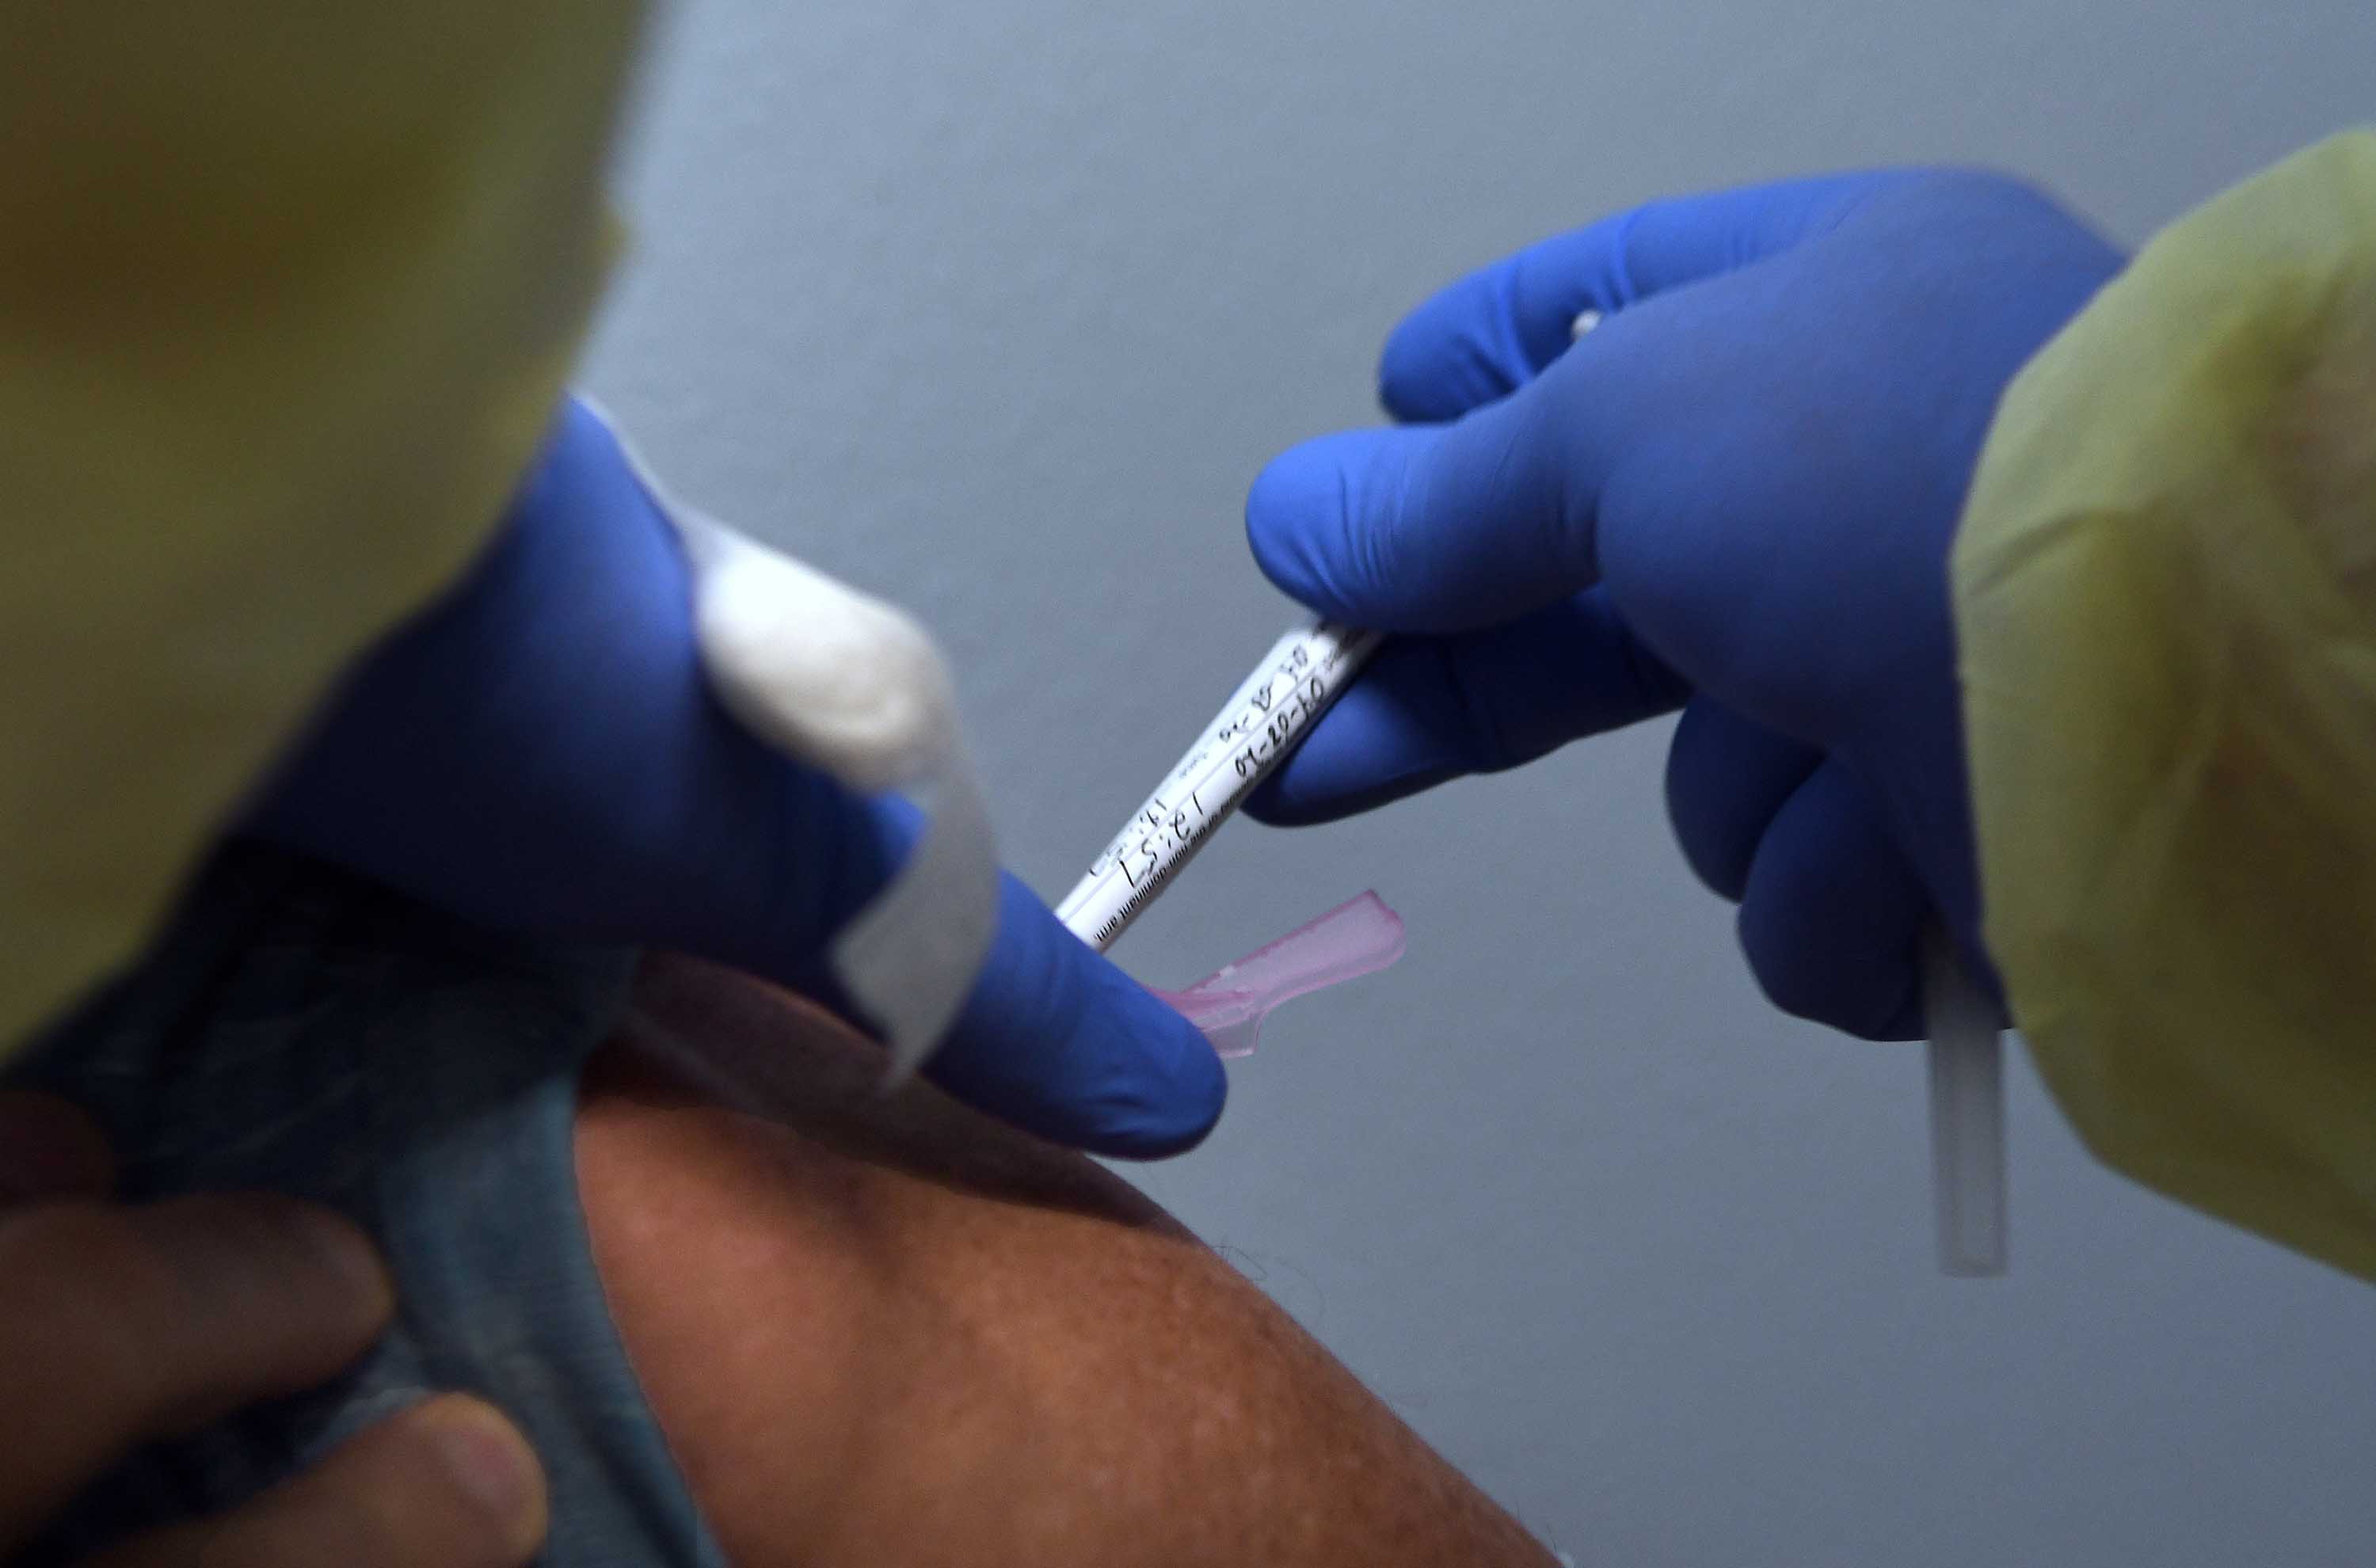 A volunteer receives an injection during the Phase 3 COVID-19 vaccine clinical trial sponsored by Moderna at Accel Research Sites in DeLand, Florida, on August 4. 